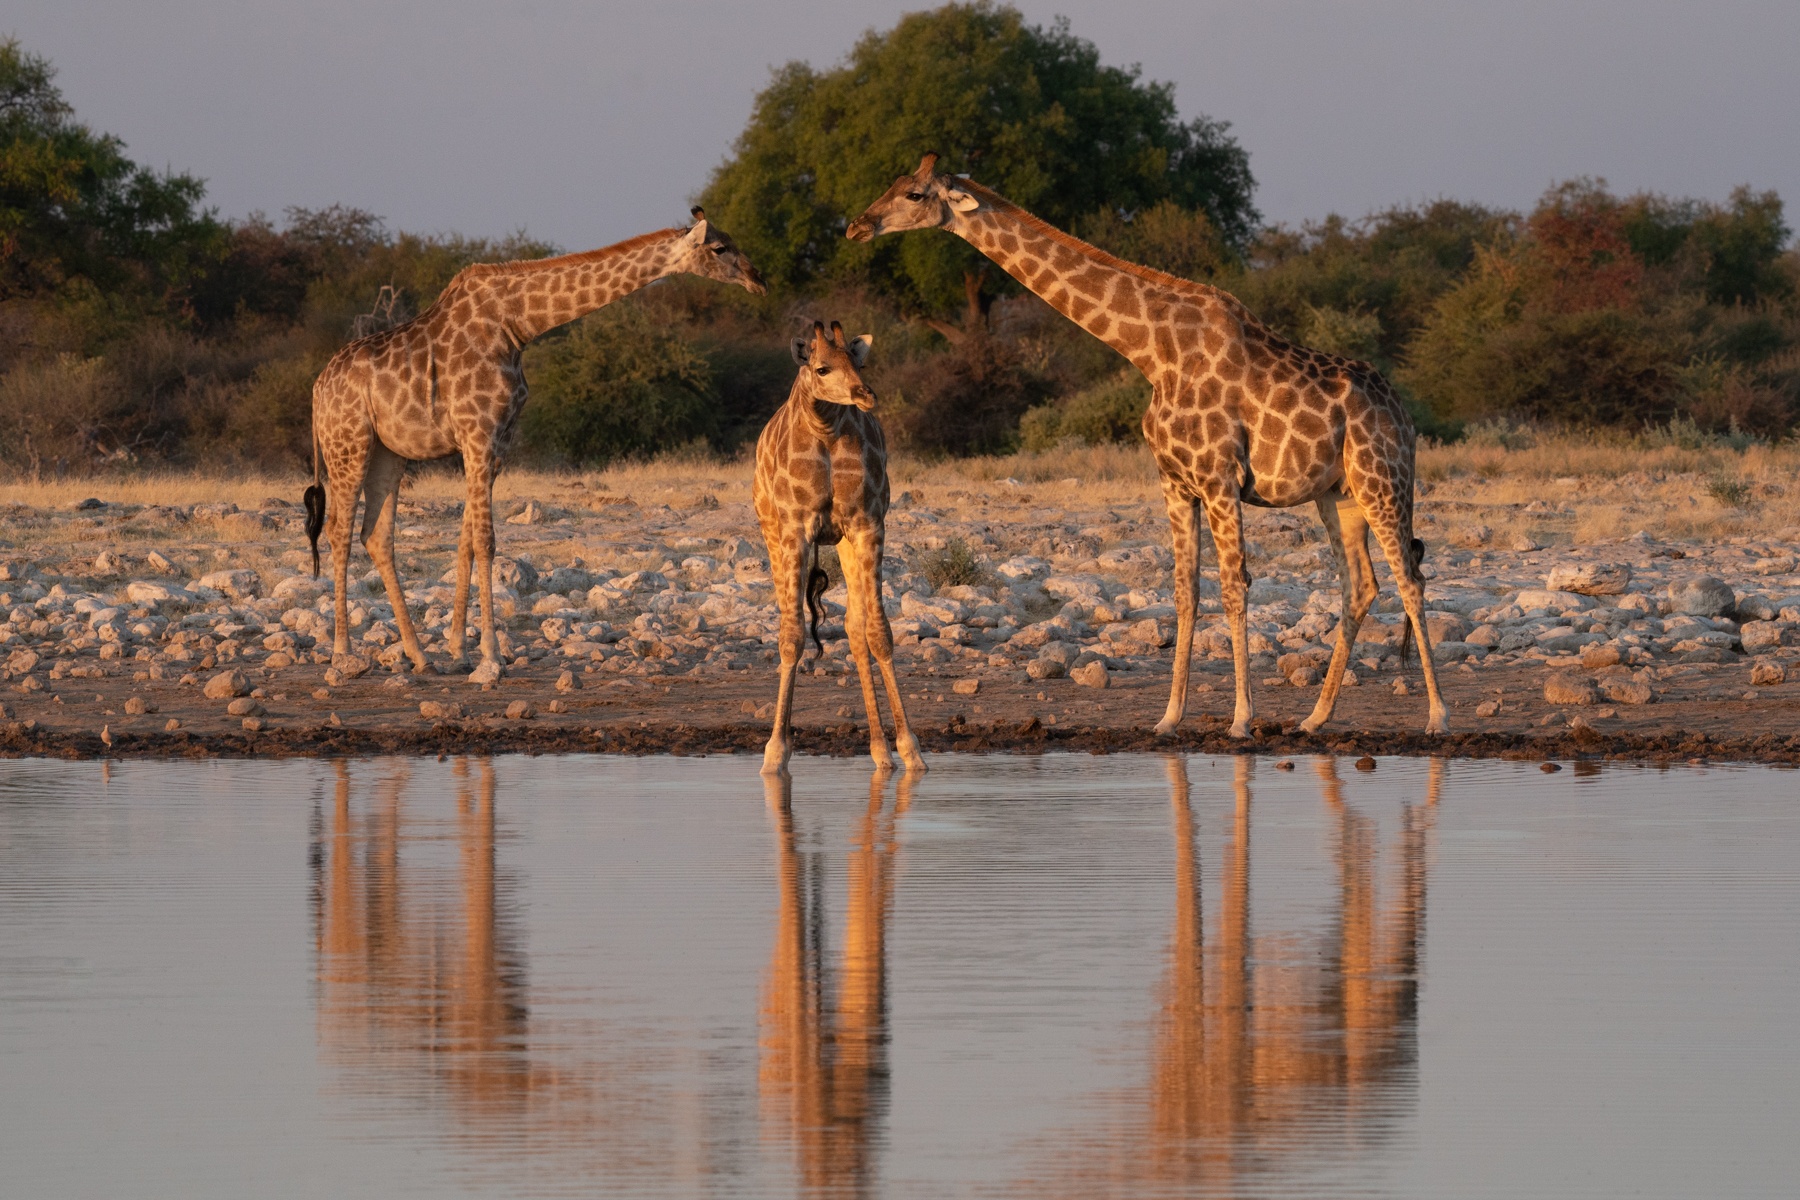 Giraffe reflections in Etosha on our photography tour of Namibia